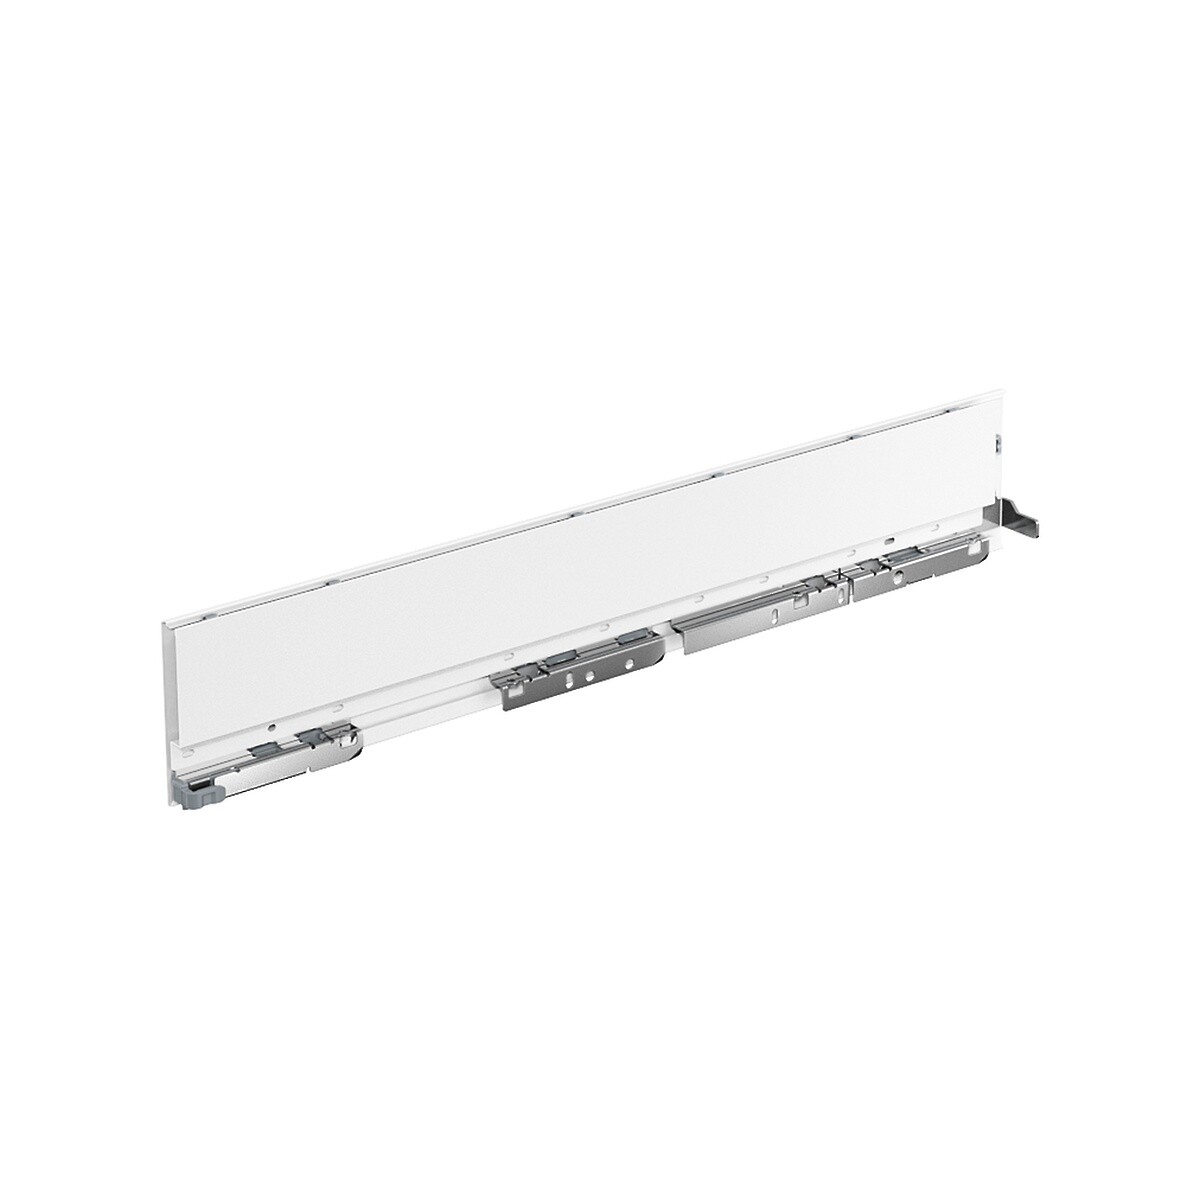 AvanTech YOU Drawer side profile, height 101 mm x NL 400 mm, White, Right